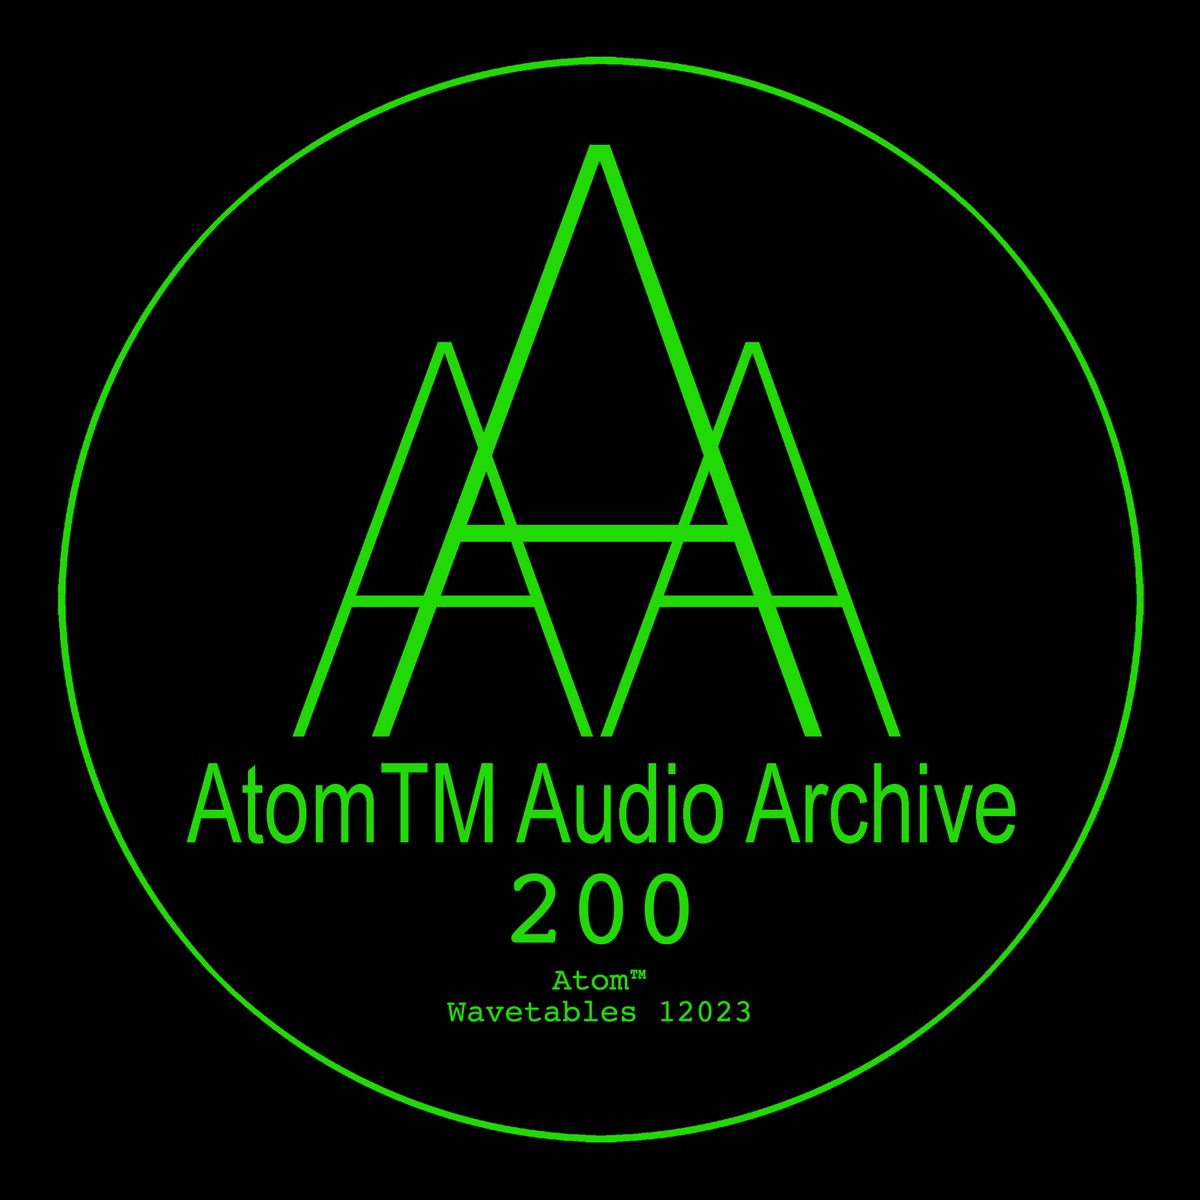 Out Now: AtomTM - Wavetables 122023 consolidates AtomTM's monthly recordings from 2023 into an album. The Bandcamp edition includes 12 previously unreleased short video pieces Available now on all digital music platforms or directly via AAA: atomtm.bandcamp.com/album/wavetabl…